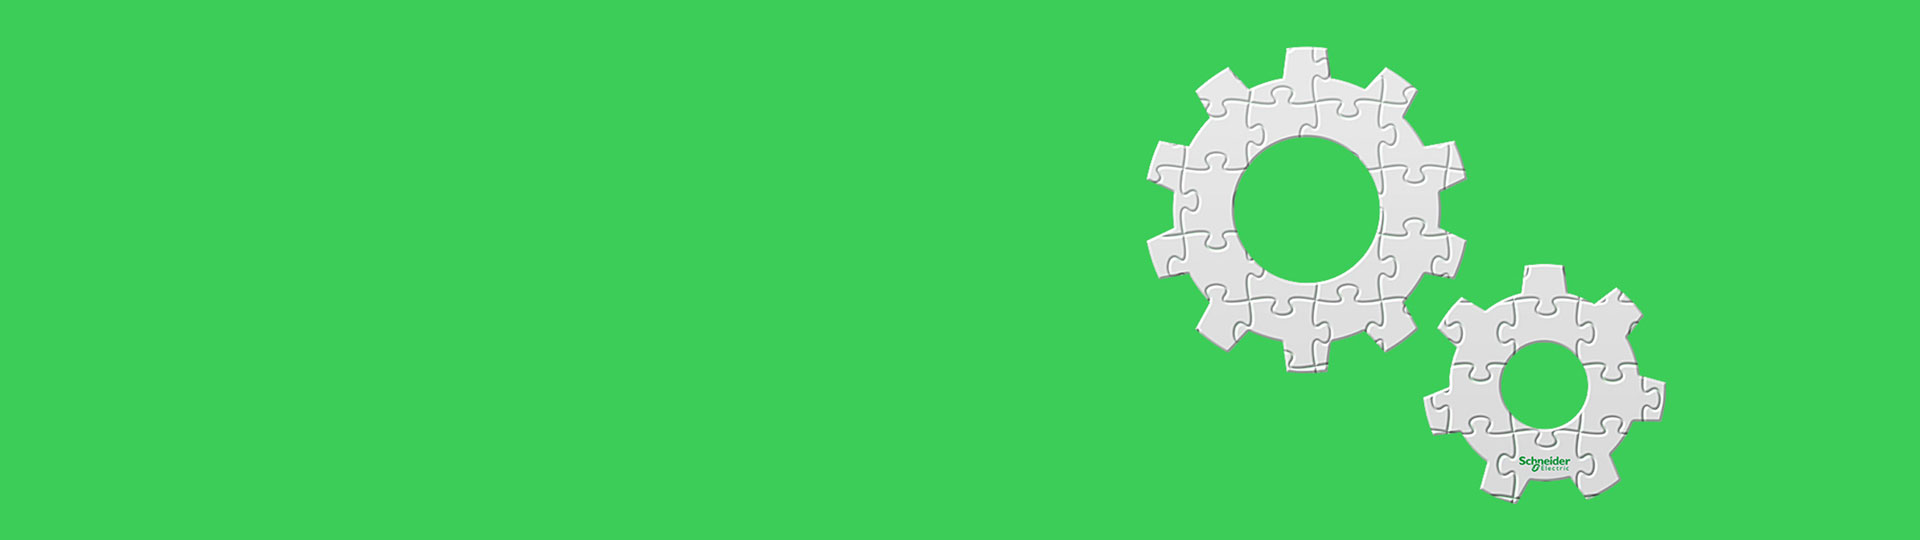 Gear icon on green background